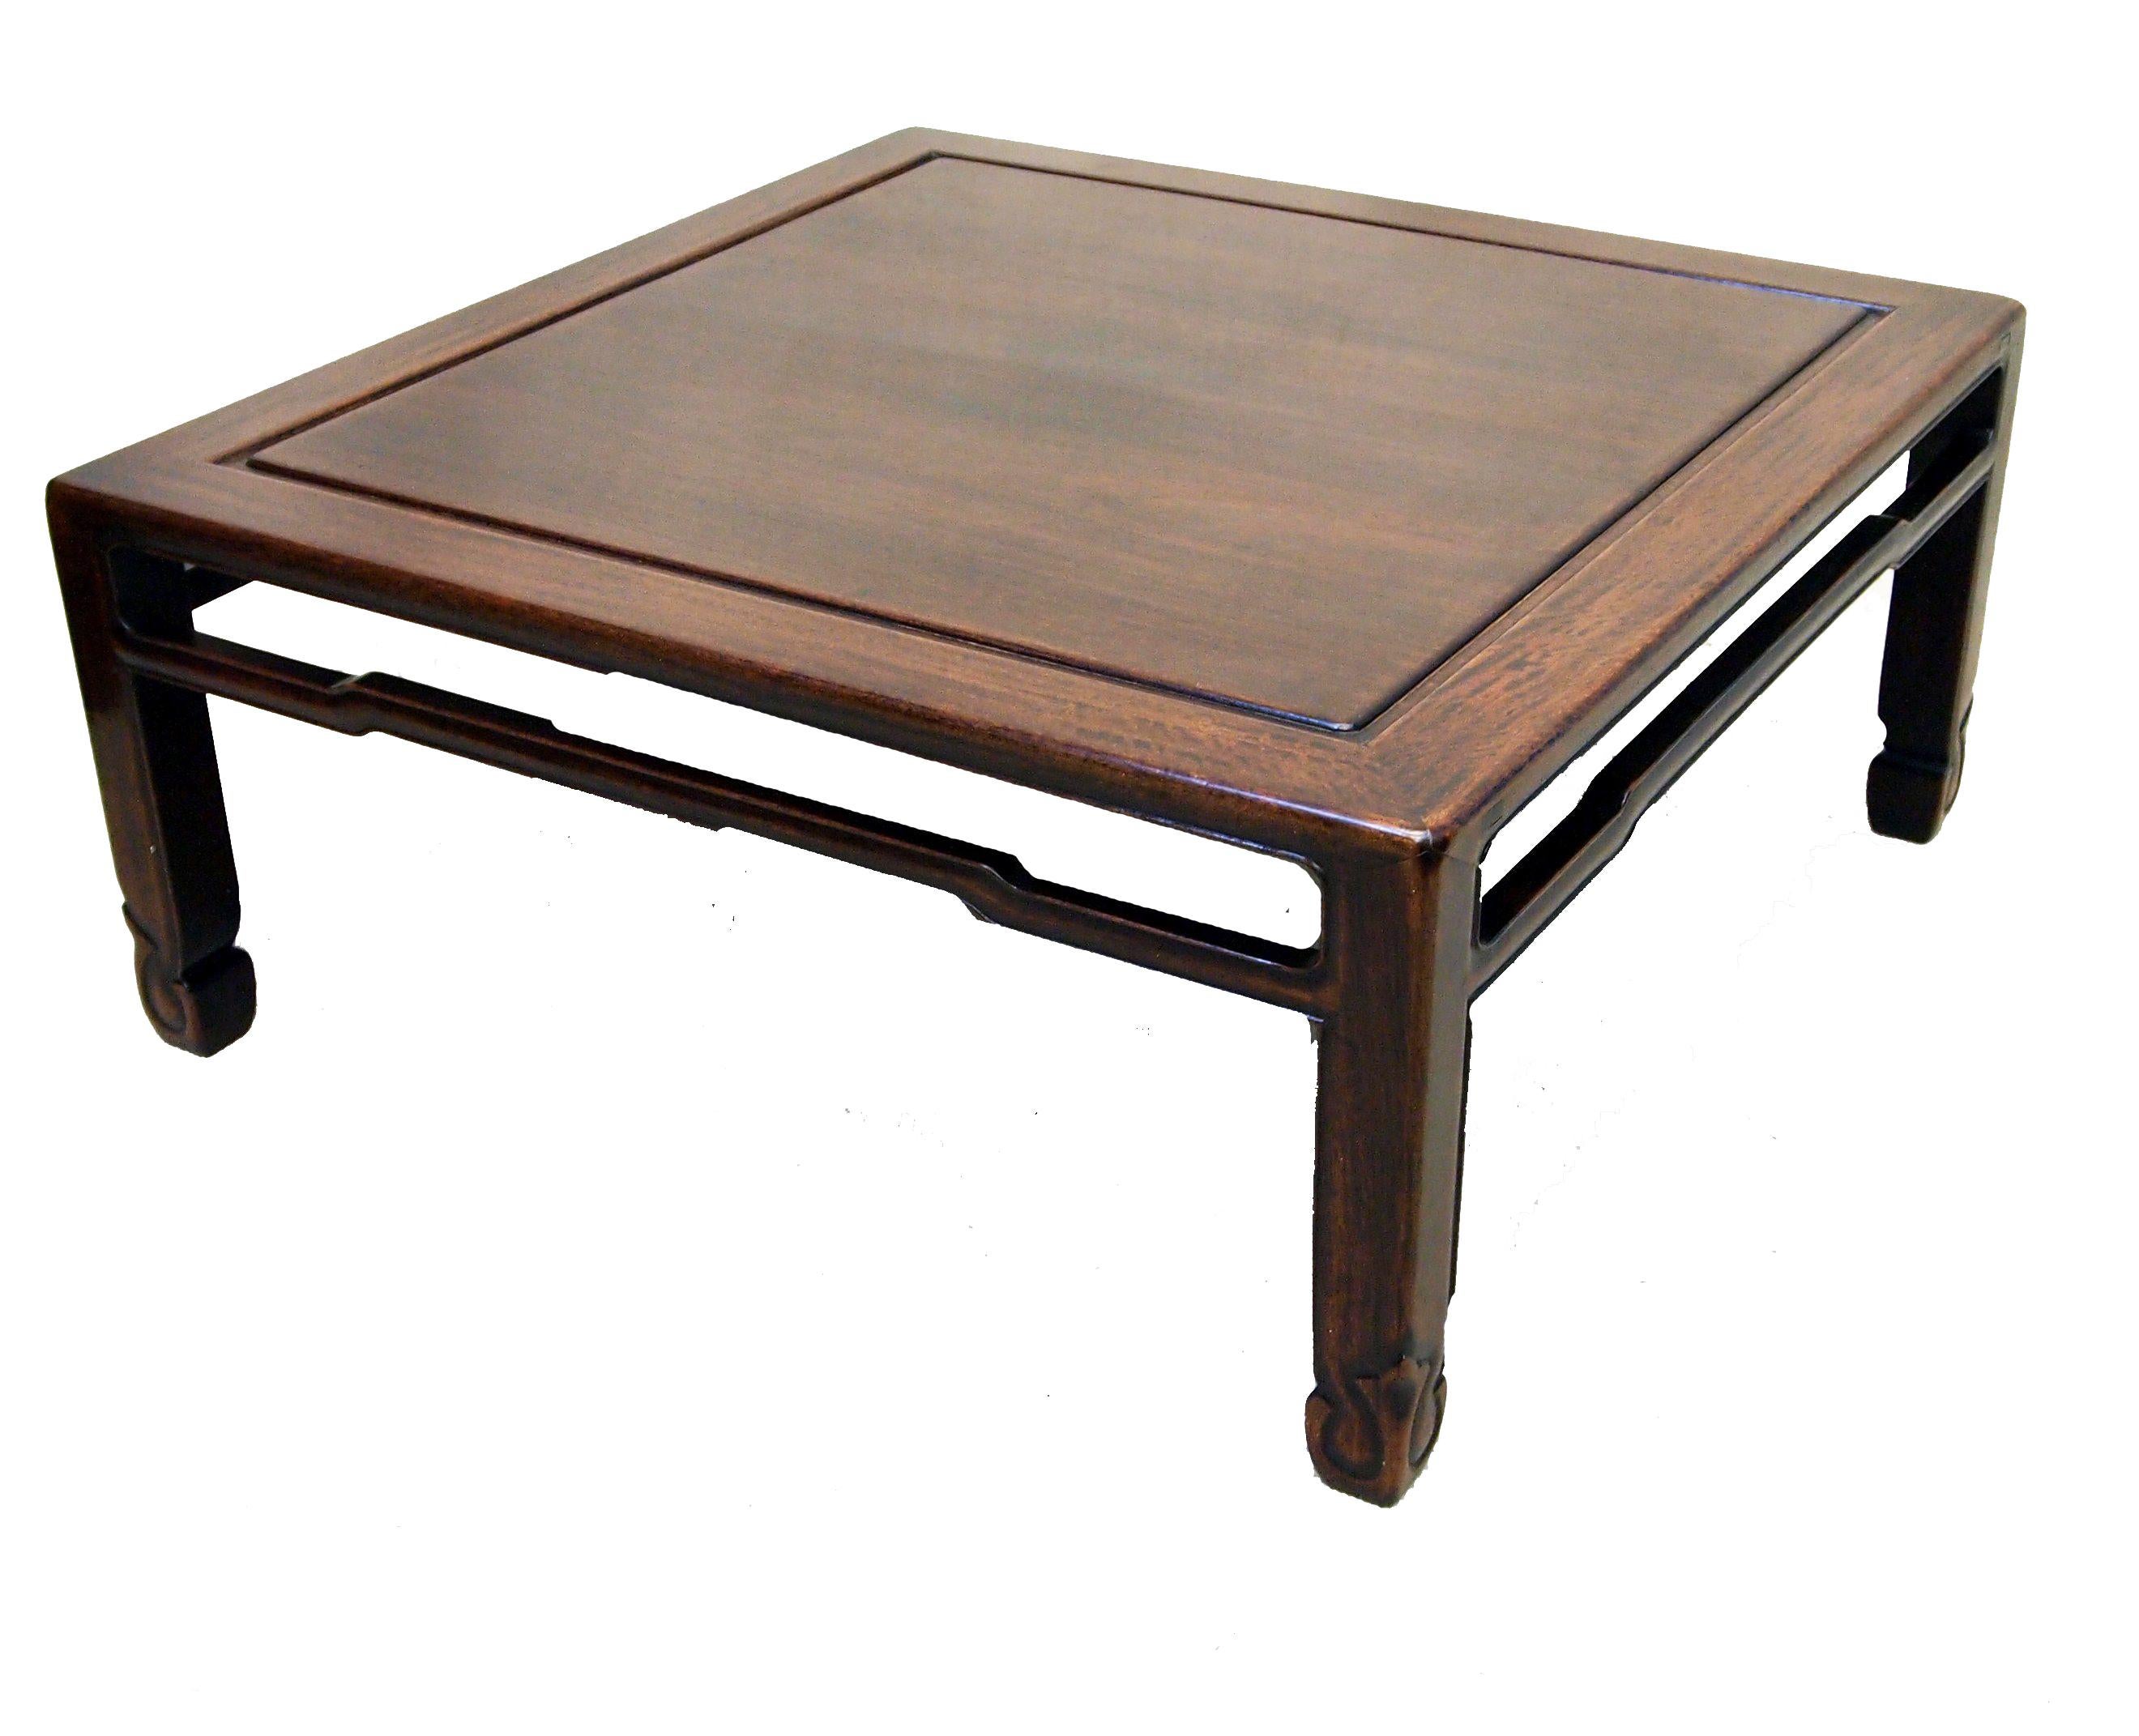 An attractive early 20th century oriental hardwood
square coffee table having figured paneled top and
moulded decoration to legs.